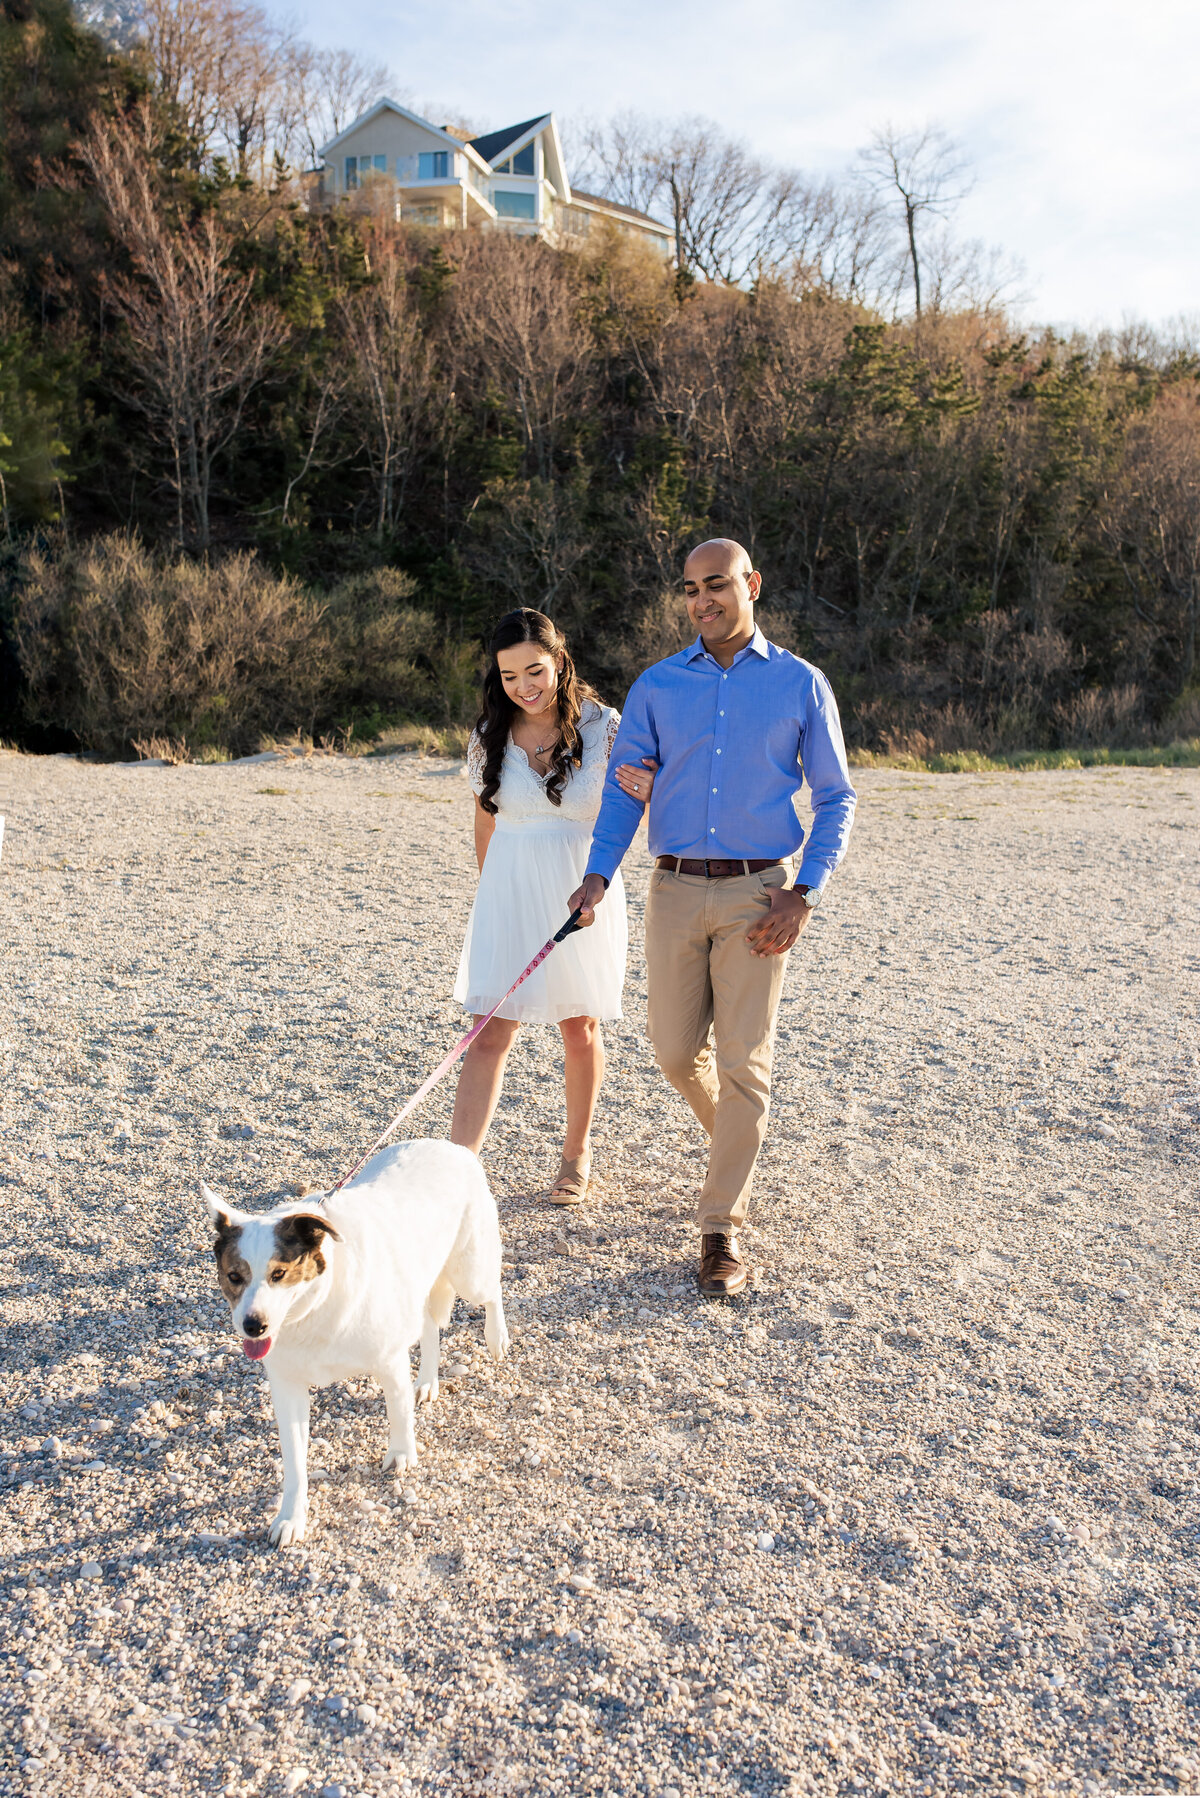 A sunny afternoon stroll with a couple and their dog on the beach in Port Jefferson